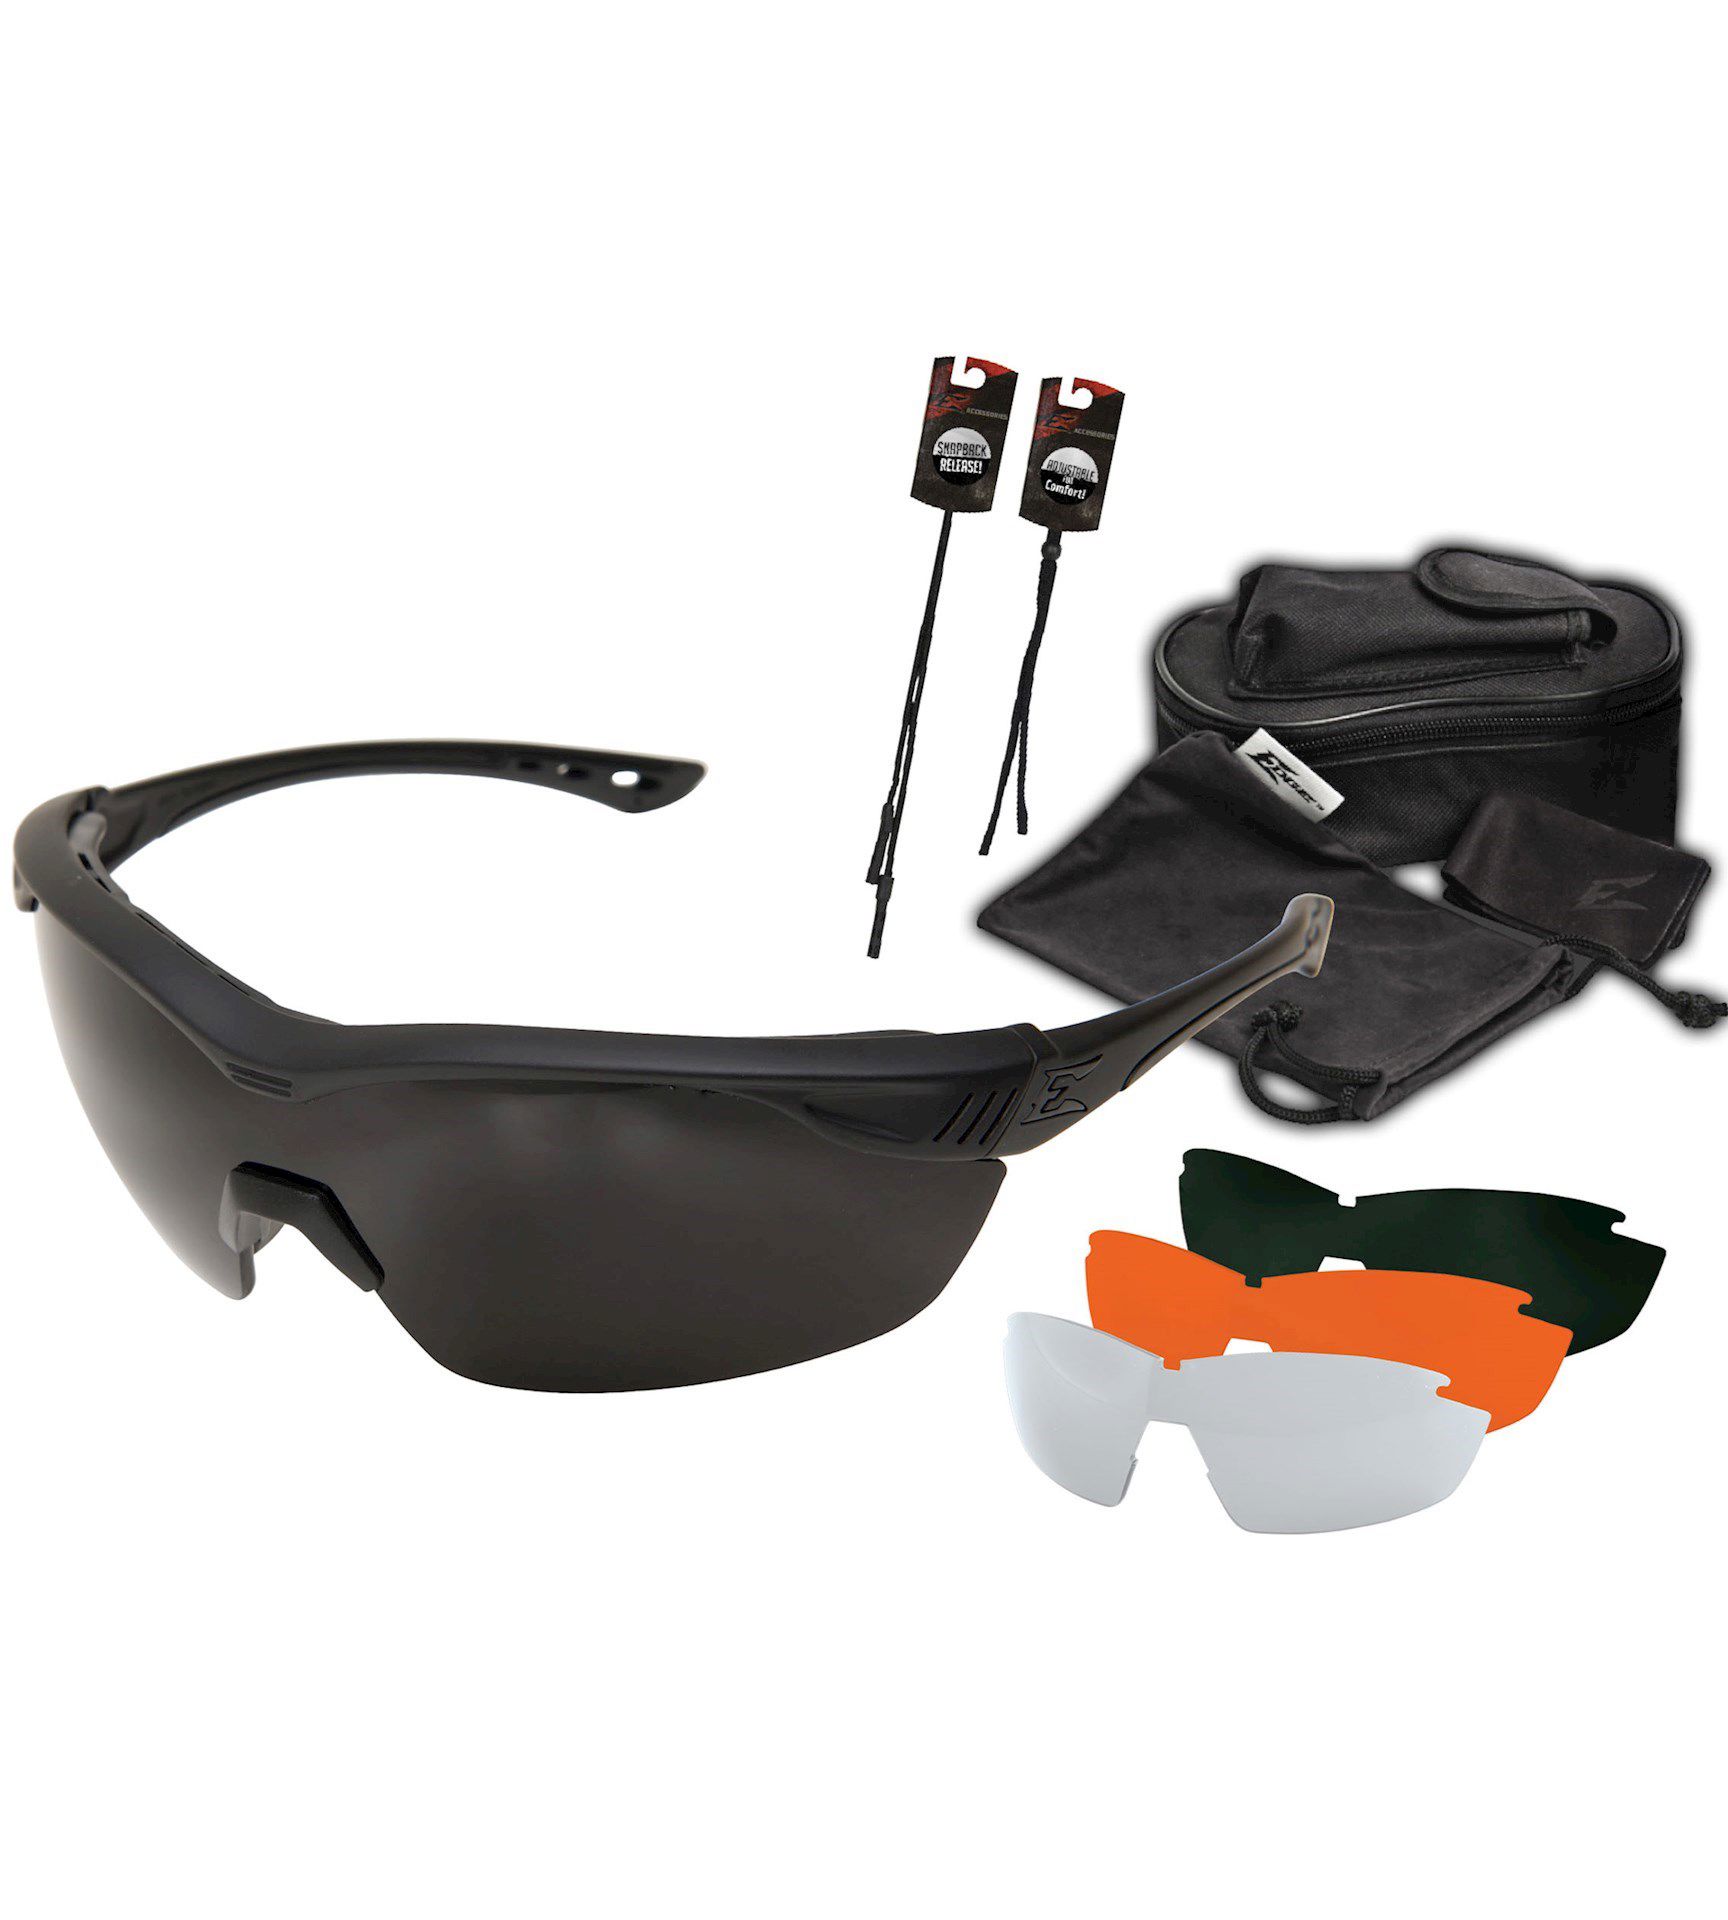 opplanet edge tactical overlord safety glasses black frame 4 lens kit polarized smoke clear tig main